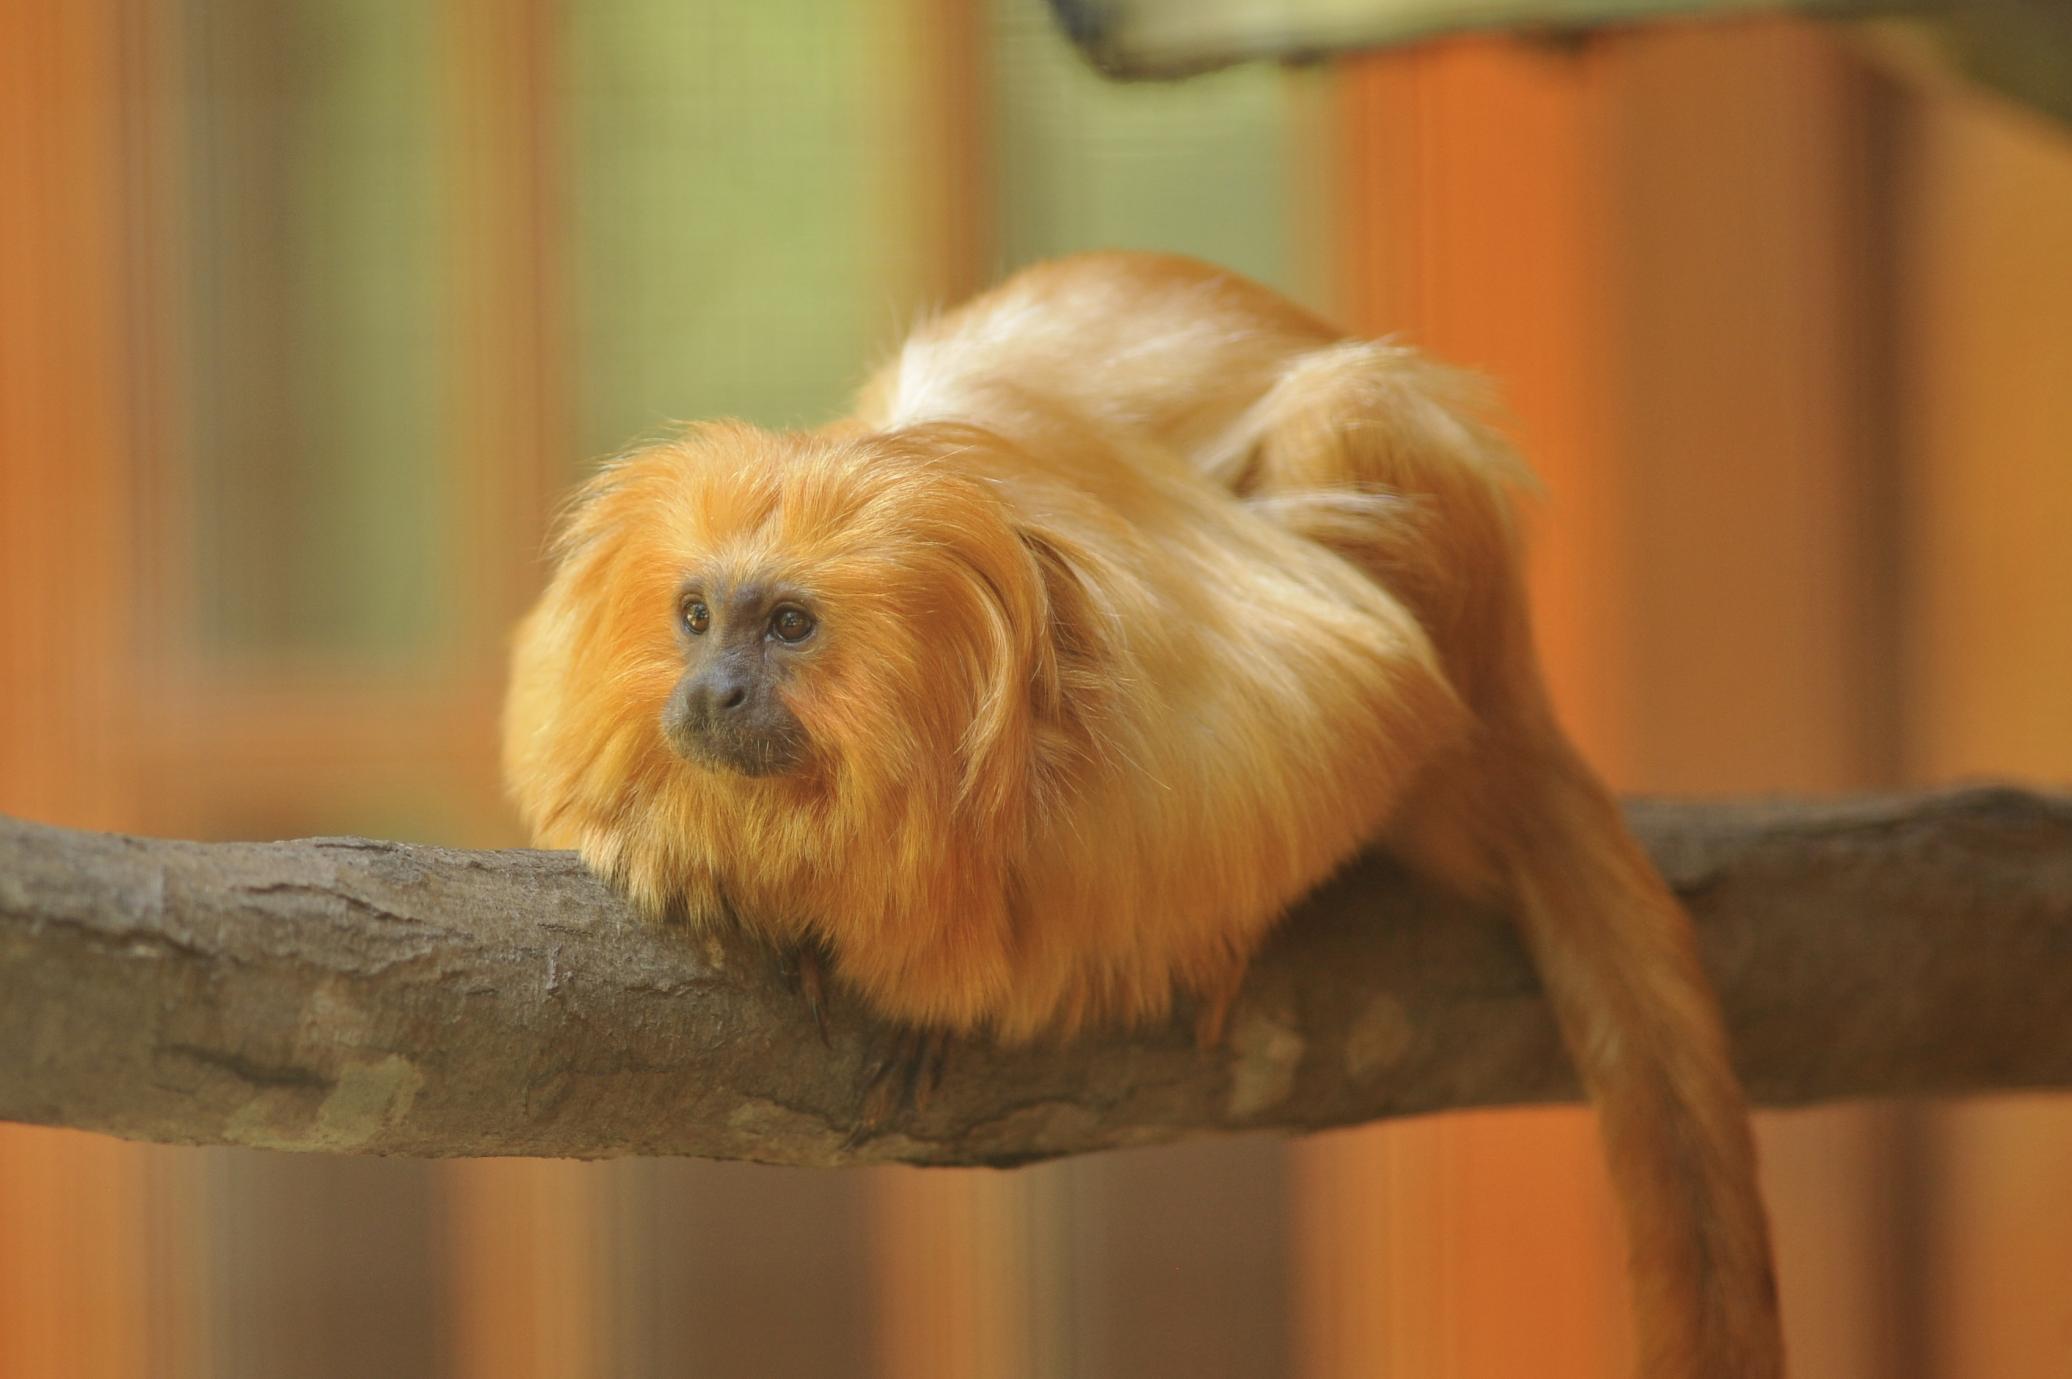 Matt Lawman: This is an image of a rare golden lion tamarin. This species is highly endangered and hard to find in the wild. Photo was taken in captivity.